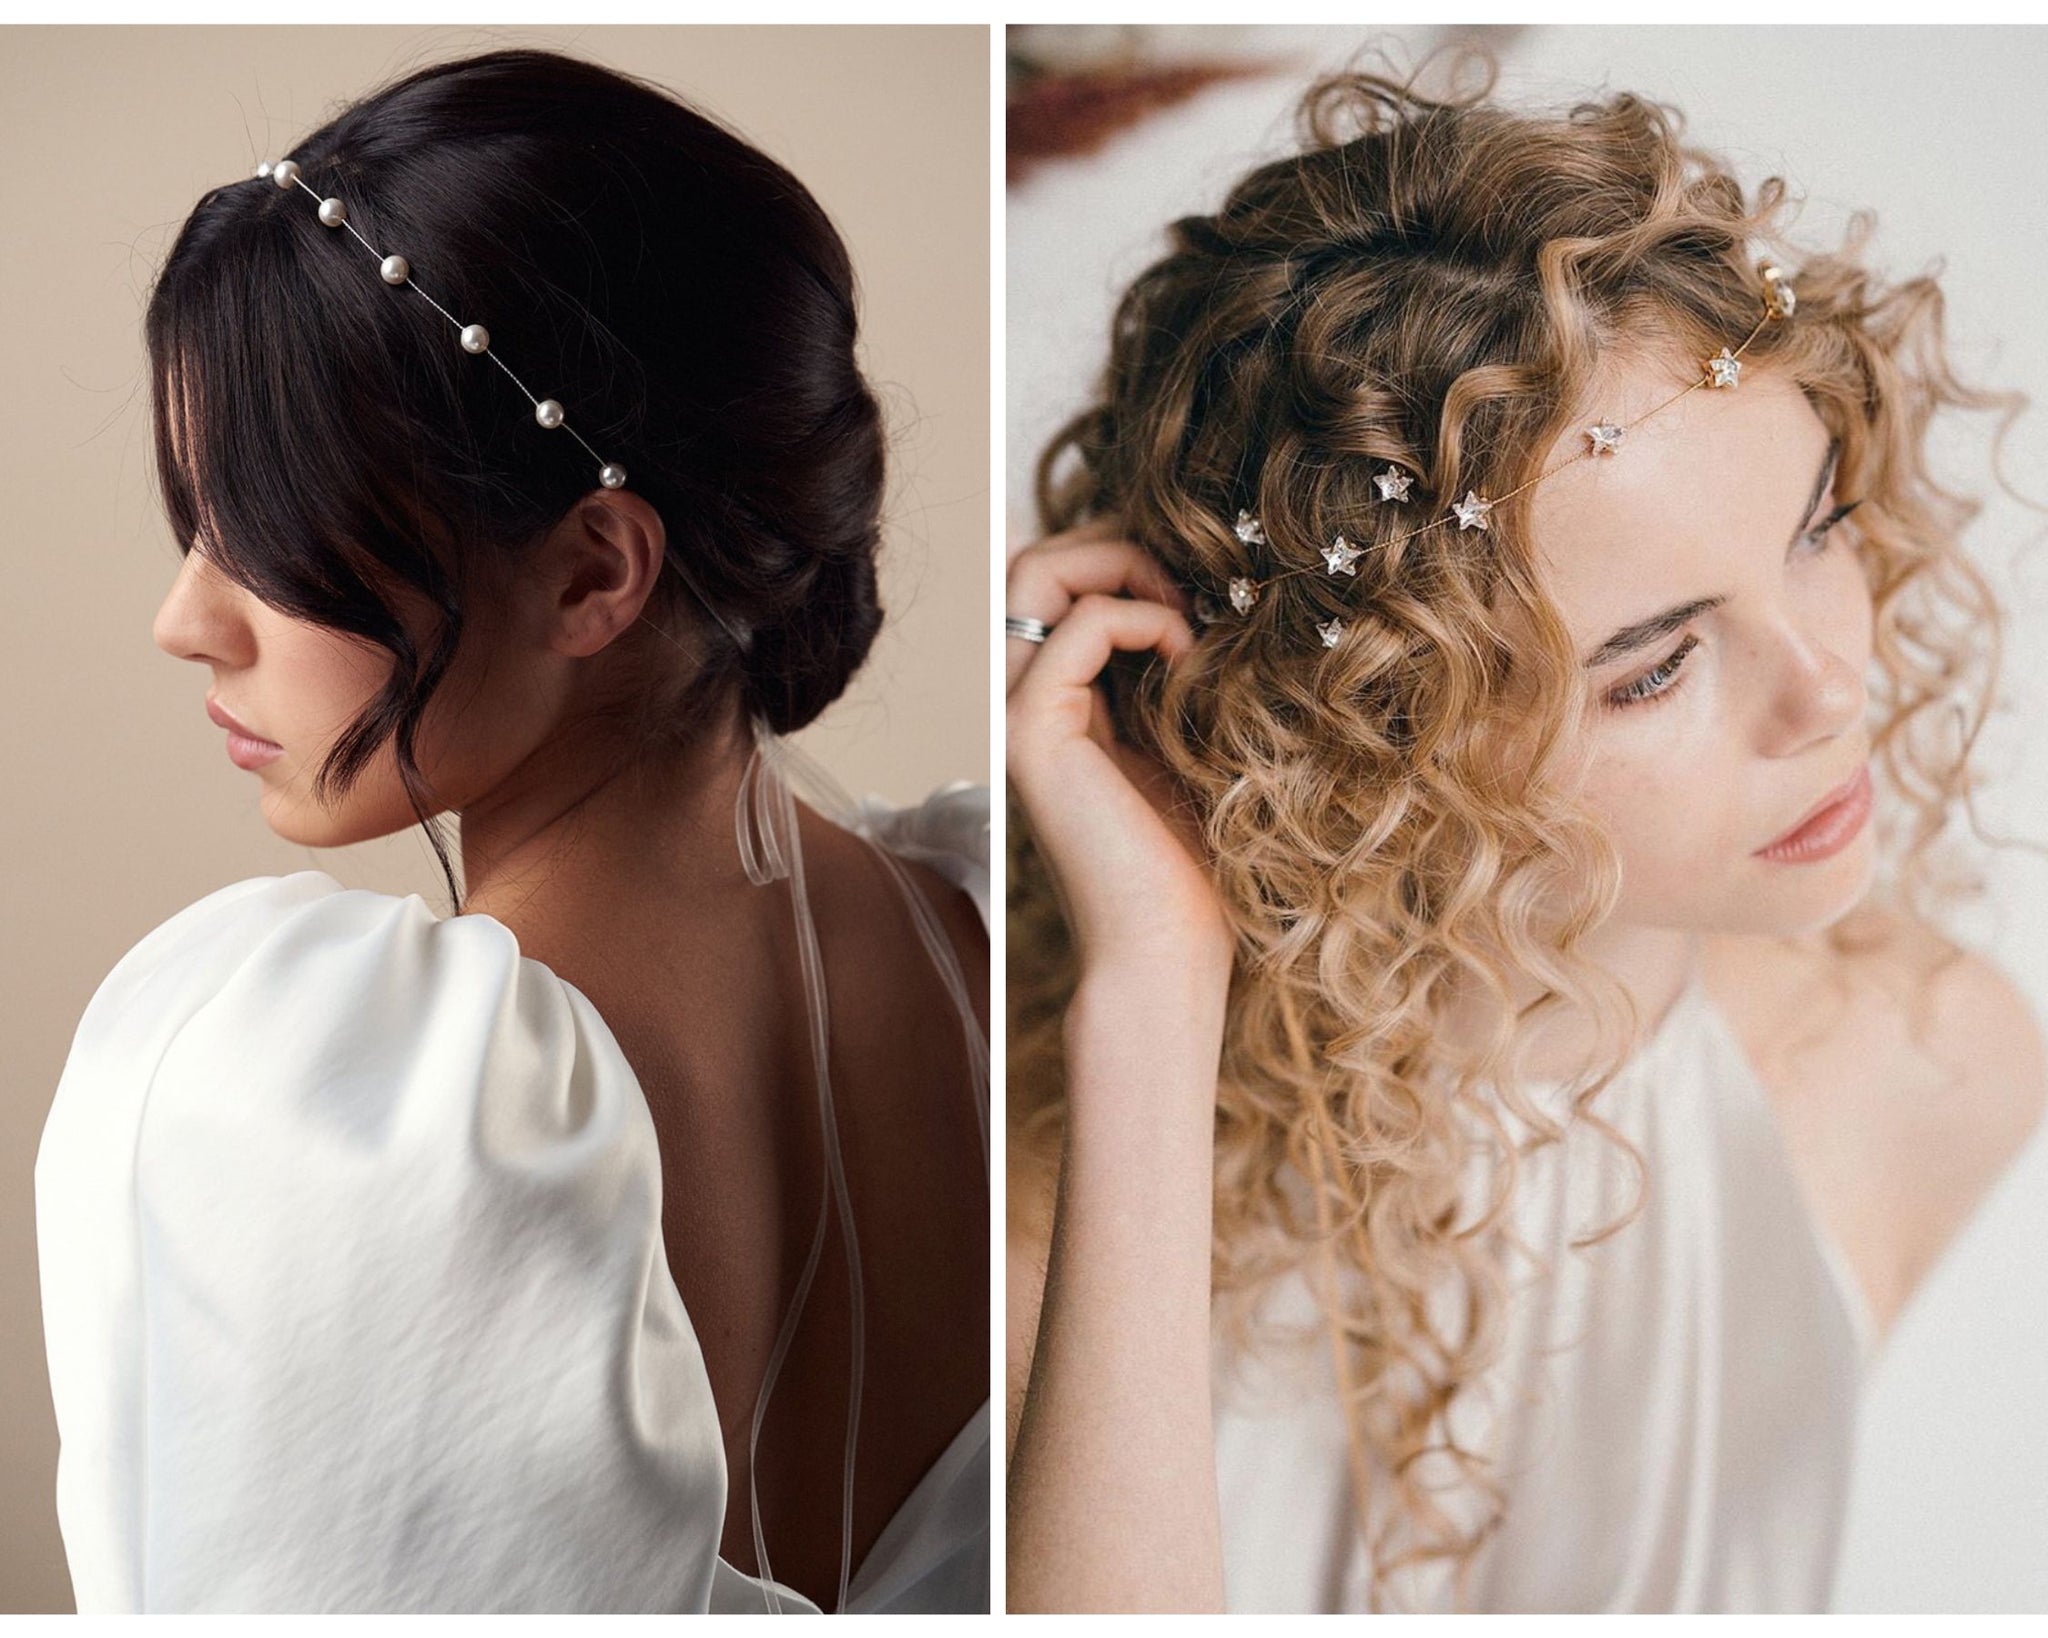 Simple pearl headband and star headband and hairpins for a bride who likes small wedding hair accessories seen on two models